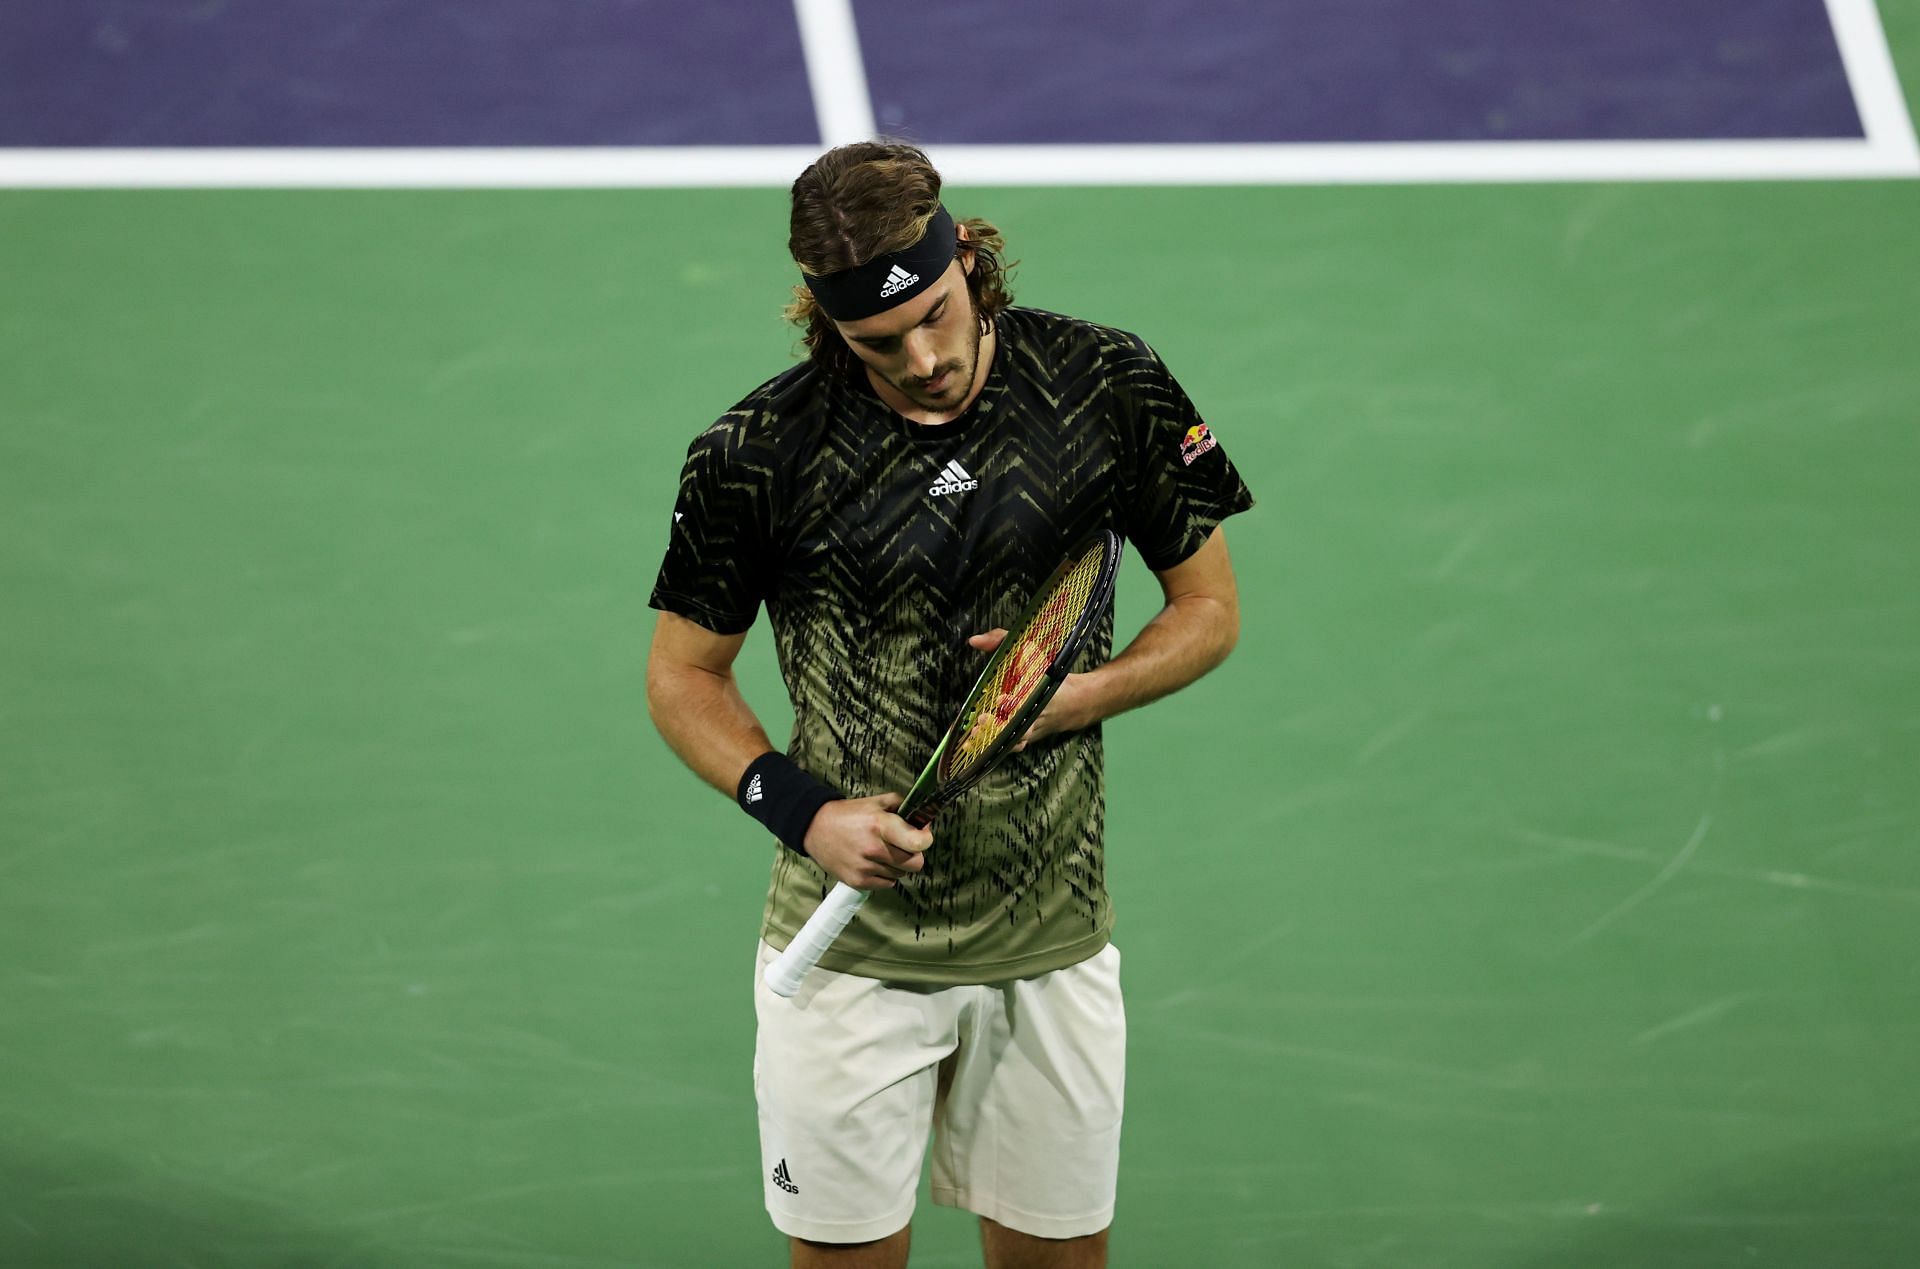 Stefanos Tsitsipas at the Indian Wells Masters 2021